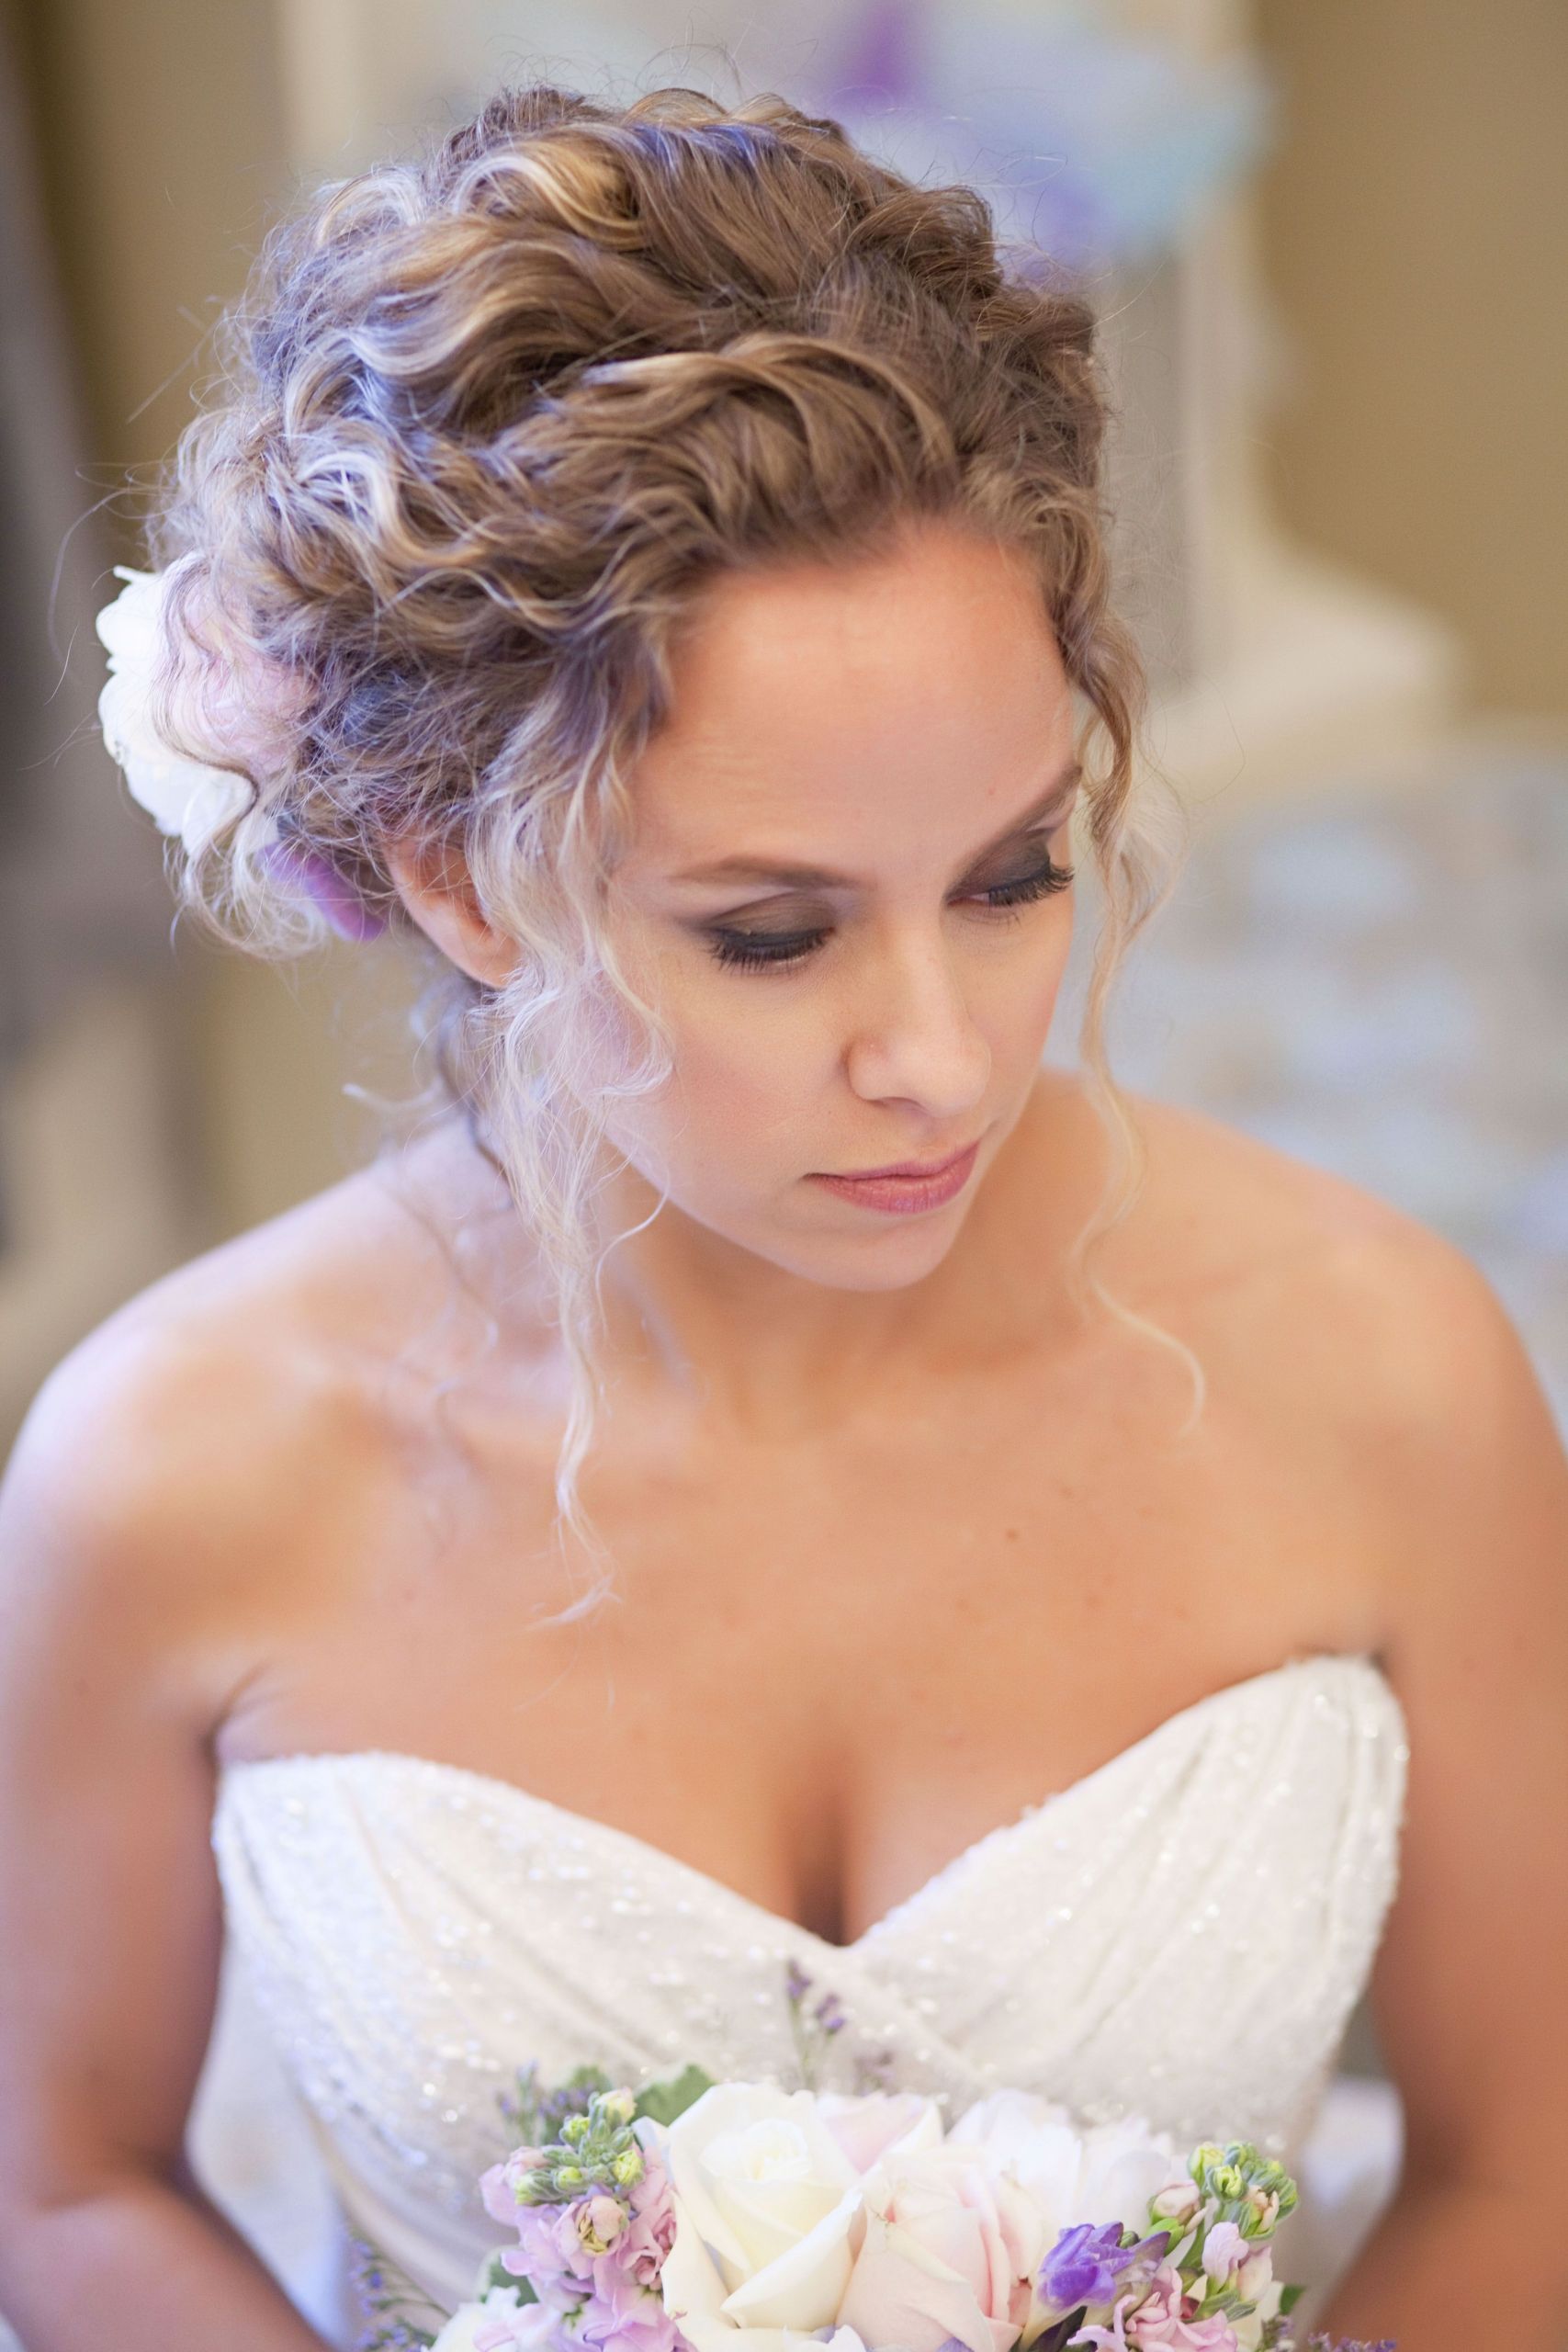 Hairstyles For Weddings Bride
 20 Soft and Sweet Curly Wedding Hairstyles